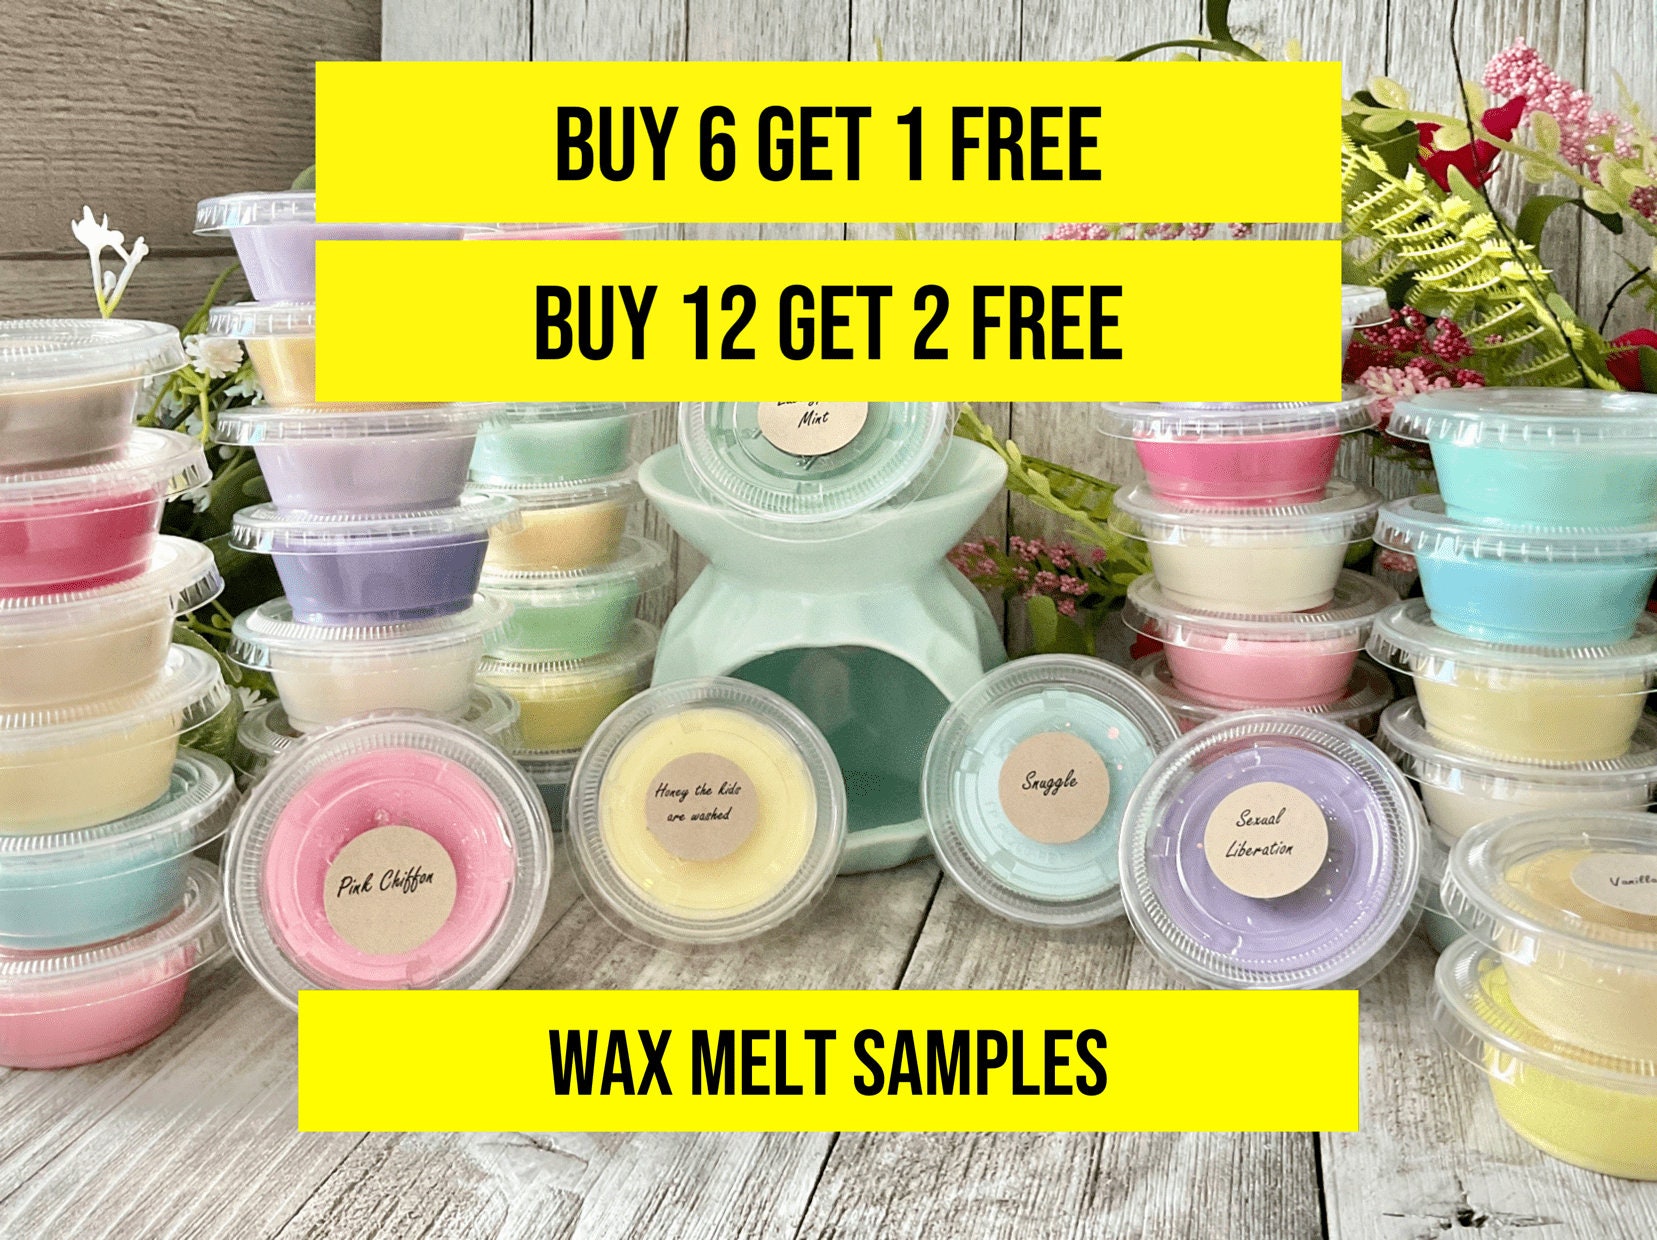 Fragrance Oil Scented Oils For Soap Making, Body Butters, Candle Making,  Lotion, Wholesale, Bulk, Perfume, Diffuser, Buy 3 Get 1 FREE